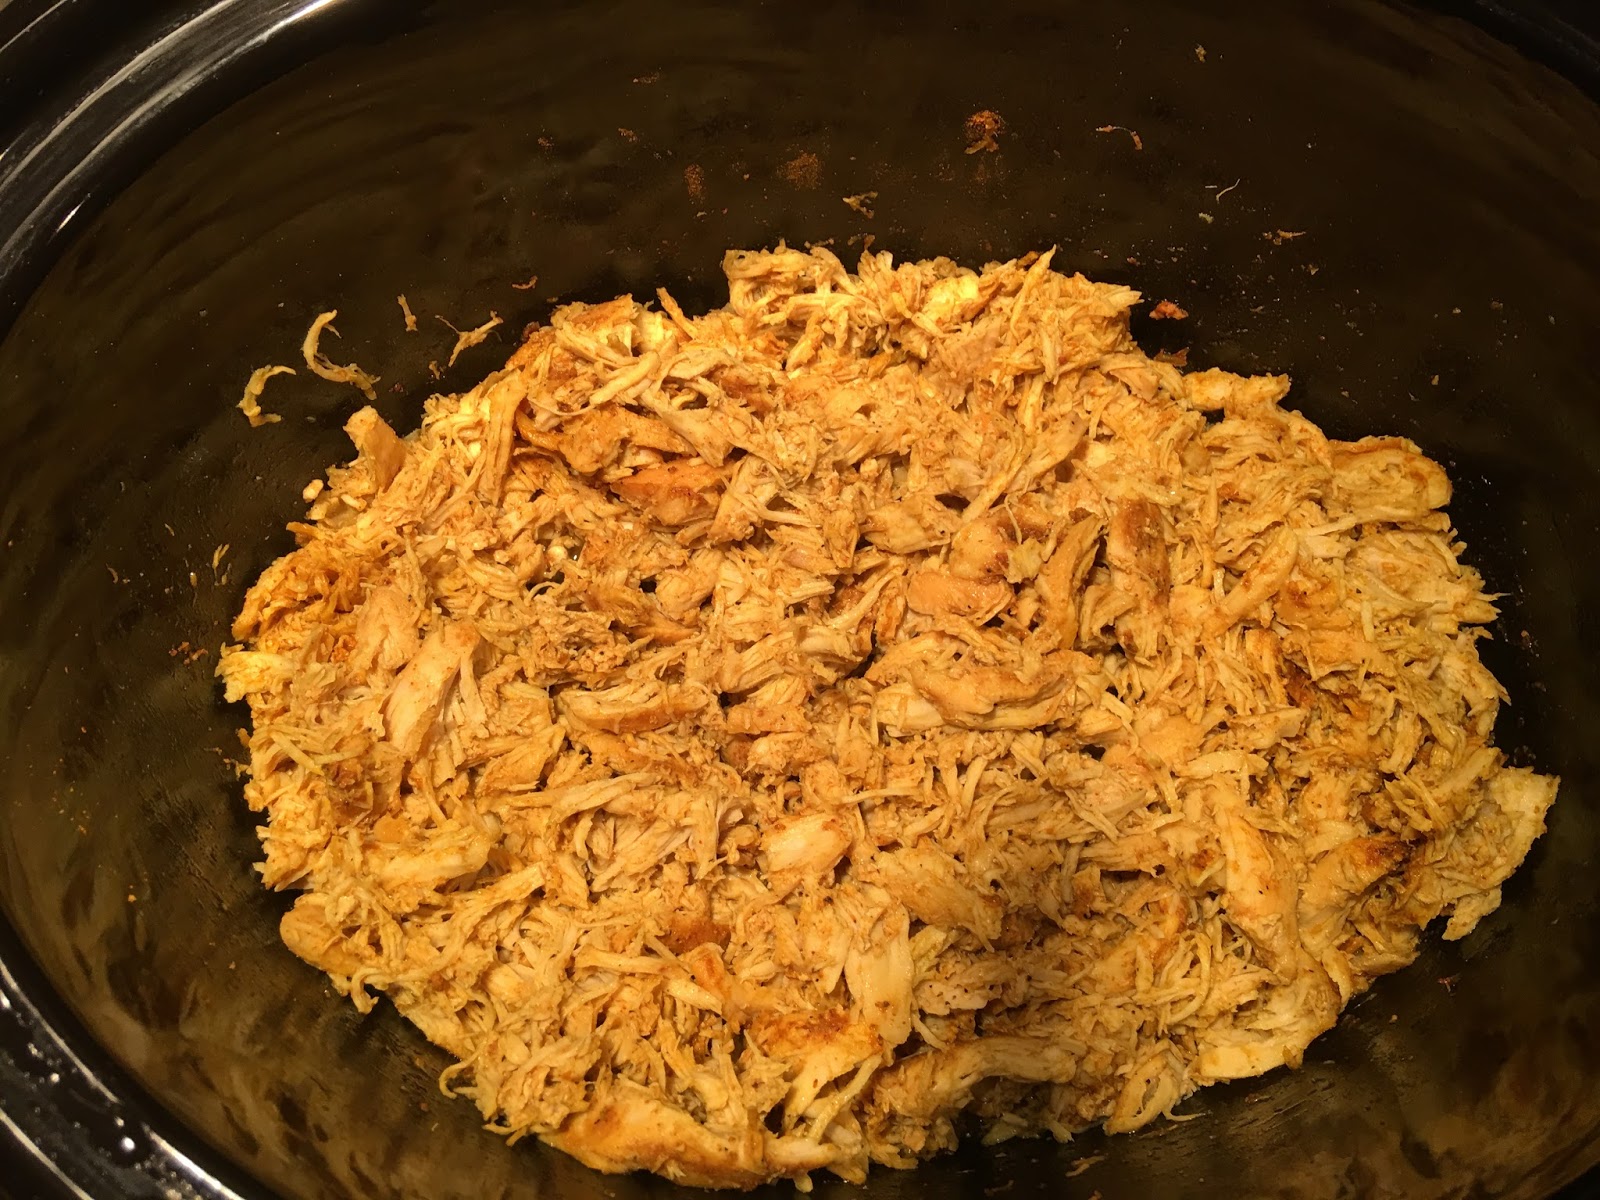 Rae-Anne's Recipes : Slow Cooker/Crockpot Shredded Curry Chicken